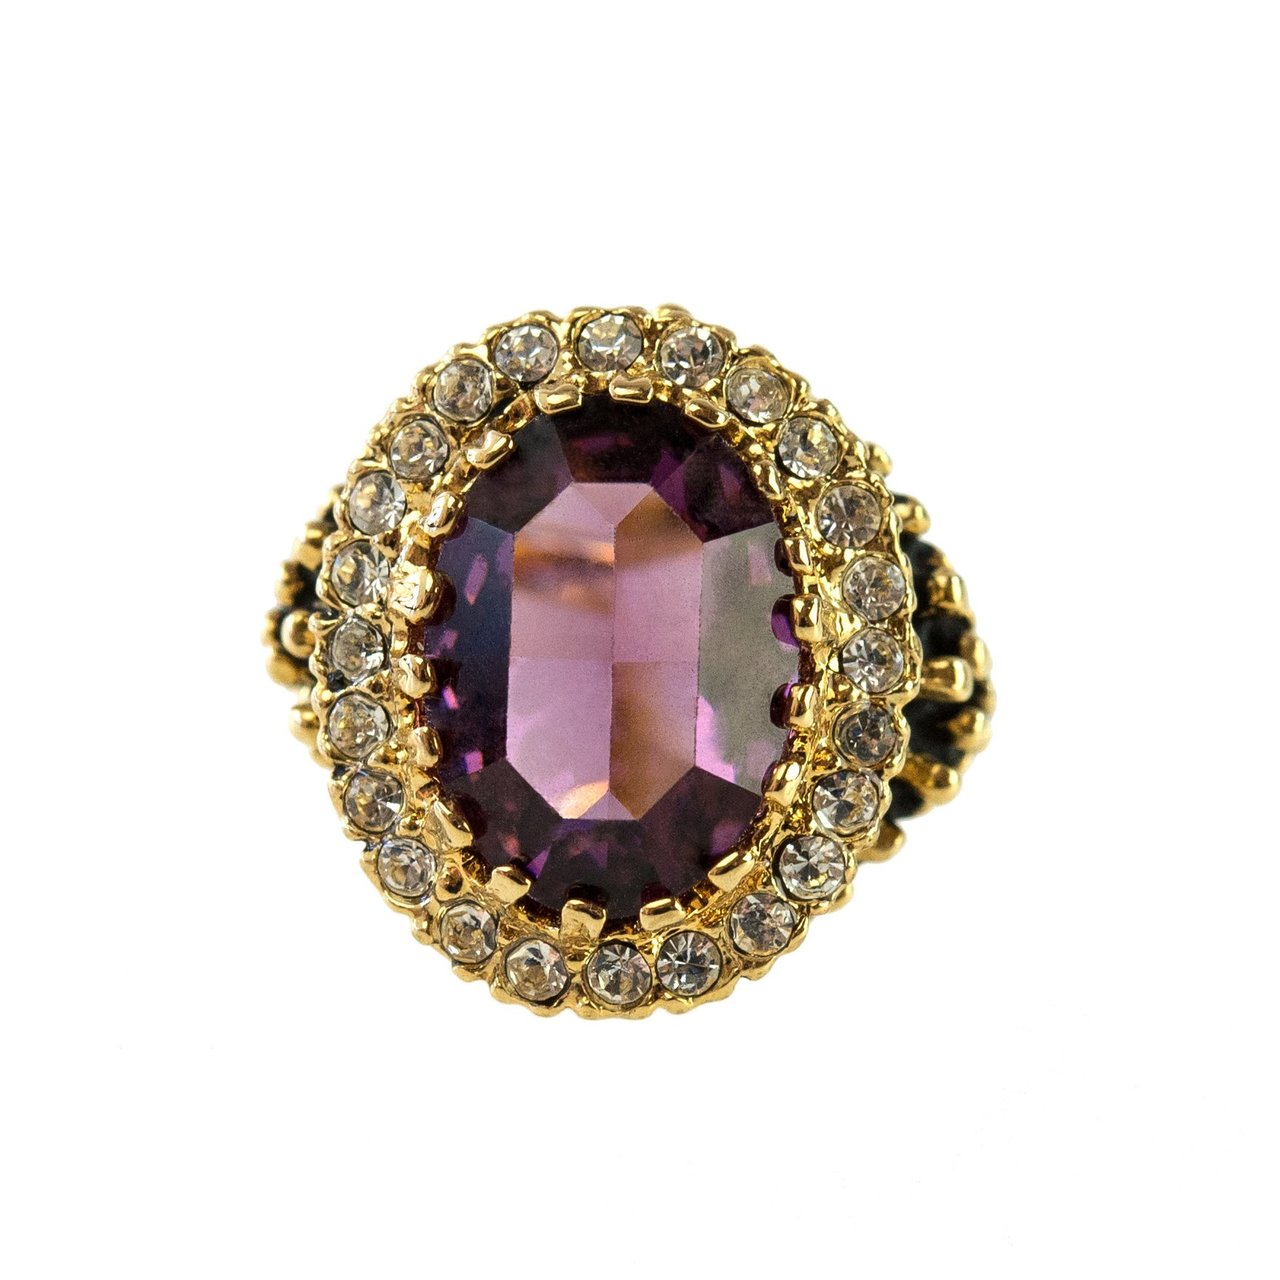 Vintage Amethyst and Clear Crystal 18k Antiqued Yellow Gold Electroplated Ring Made in the USA